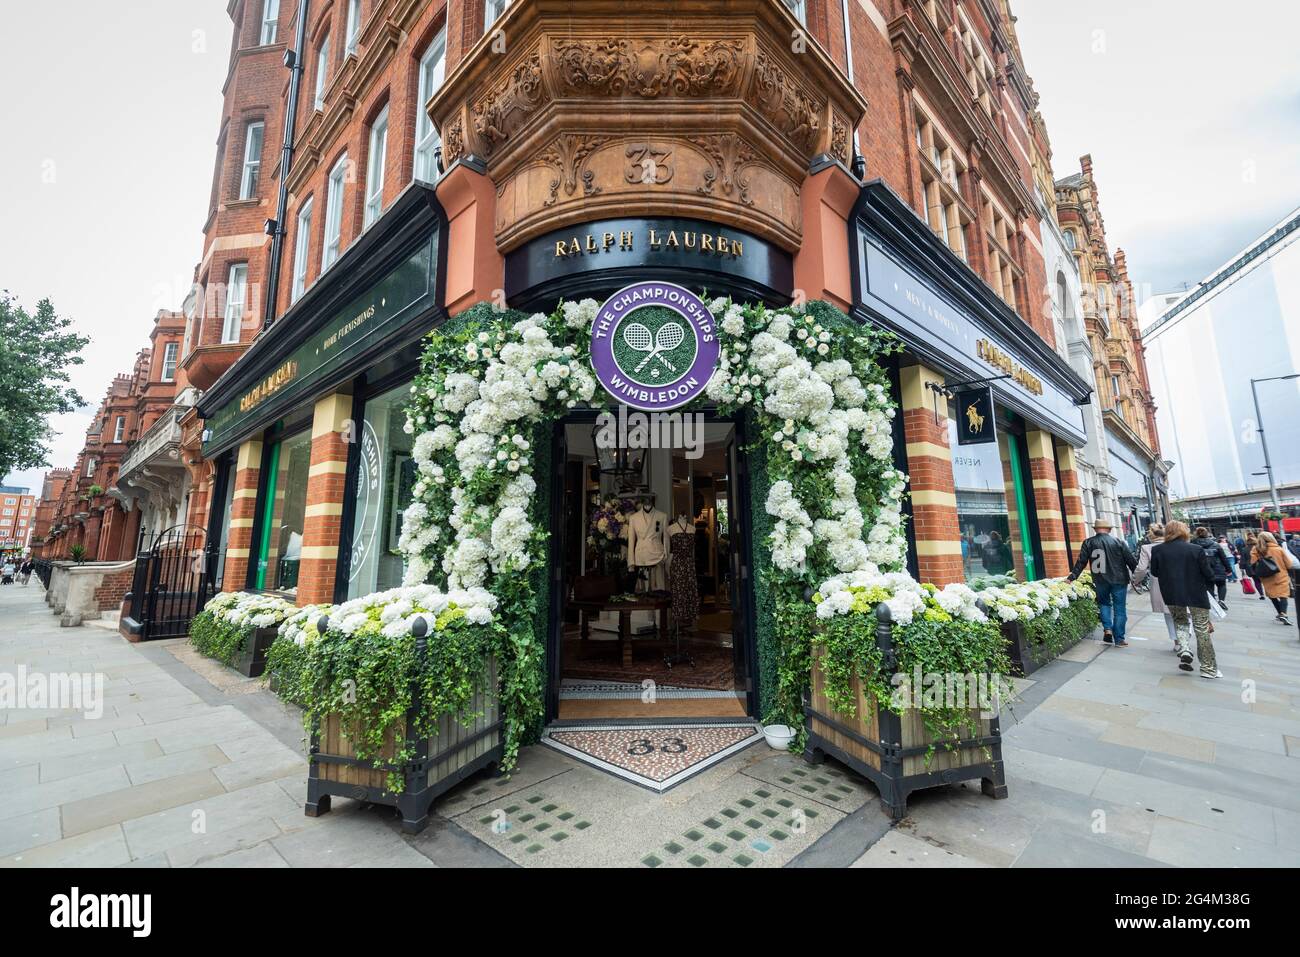 London, UK. 22 June 2021. The exterior of the Ralph Lauren store in Sloane  Square, decorated ahead of this year's upcoming Wimbledon tennis  championships at the All England club. Ralph Lauren supplies